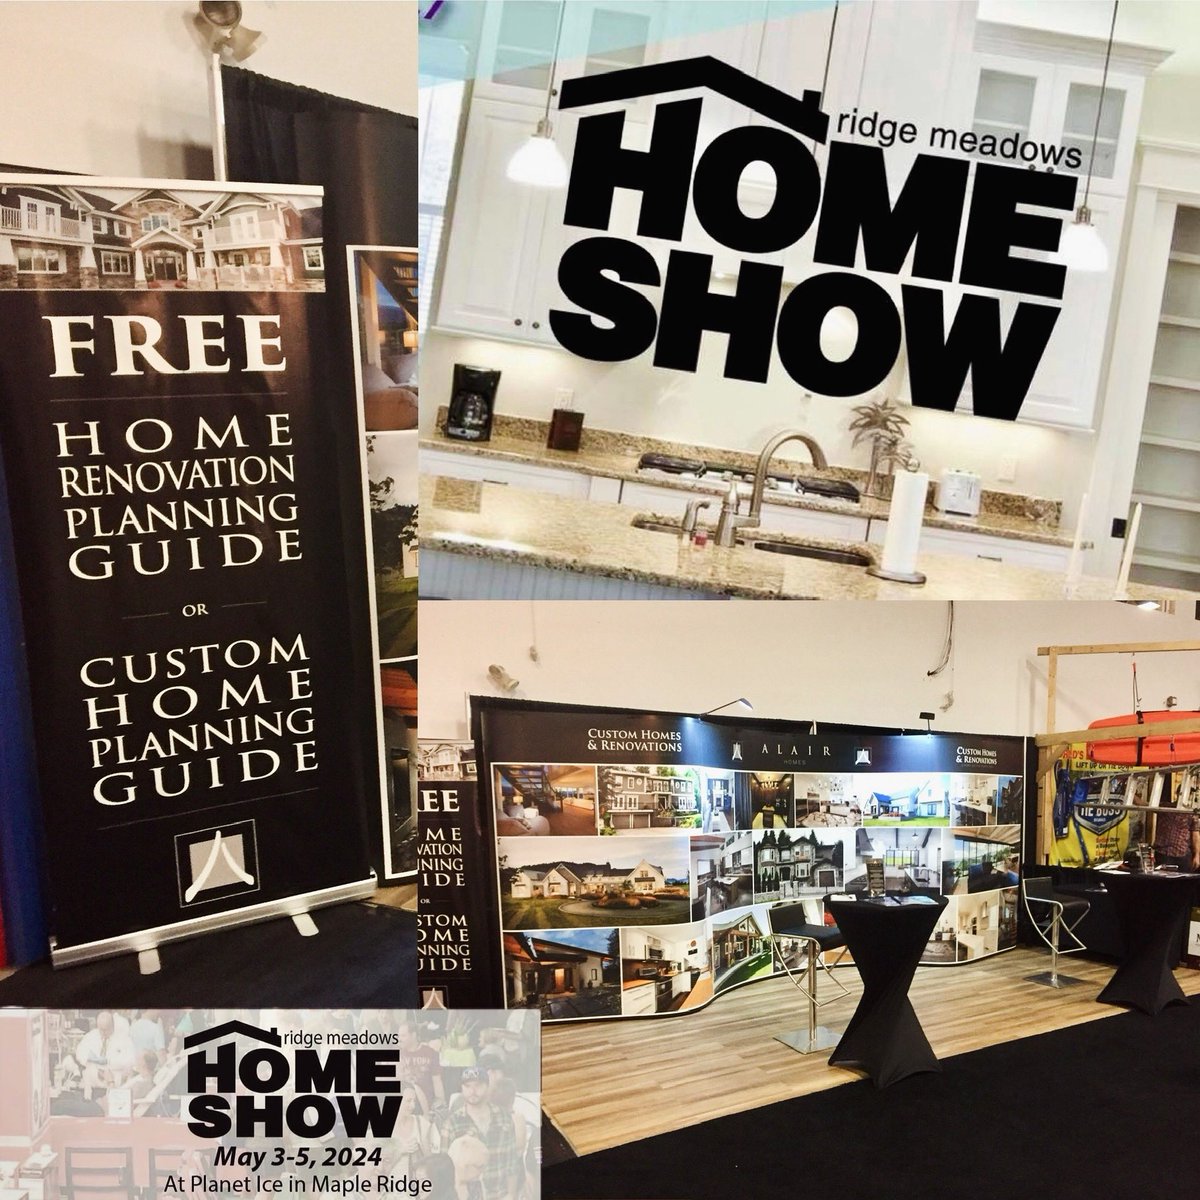 It’s that time of year again, just 11 more days!! Mark the schedule and come visit us down at the Ridge Meadows HOME SHOW May 3,4,5 as this Home Show has it all so bring the Family!!

#Alair #livingbetterstartshere® #mapleridge #mapleridgebuilder #RidgeMeadowsHomeShow